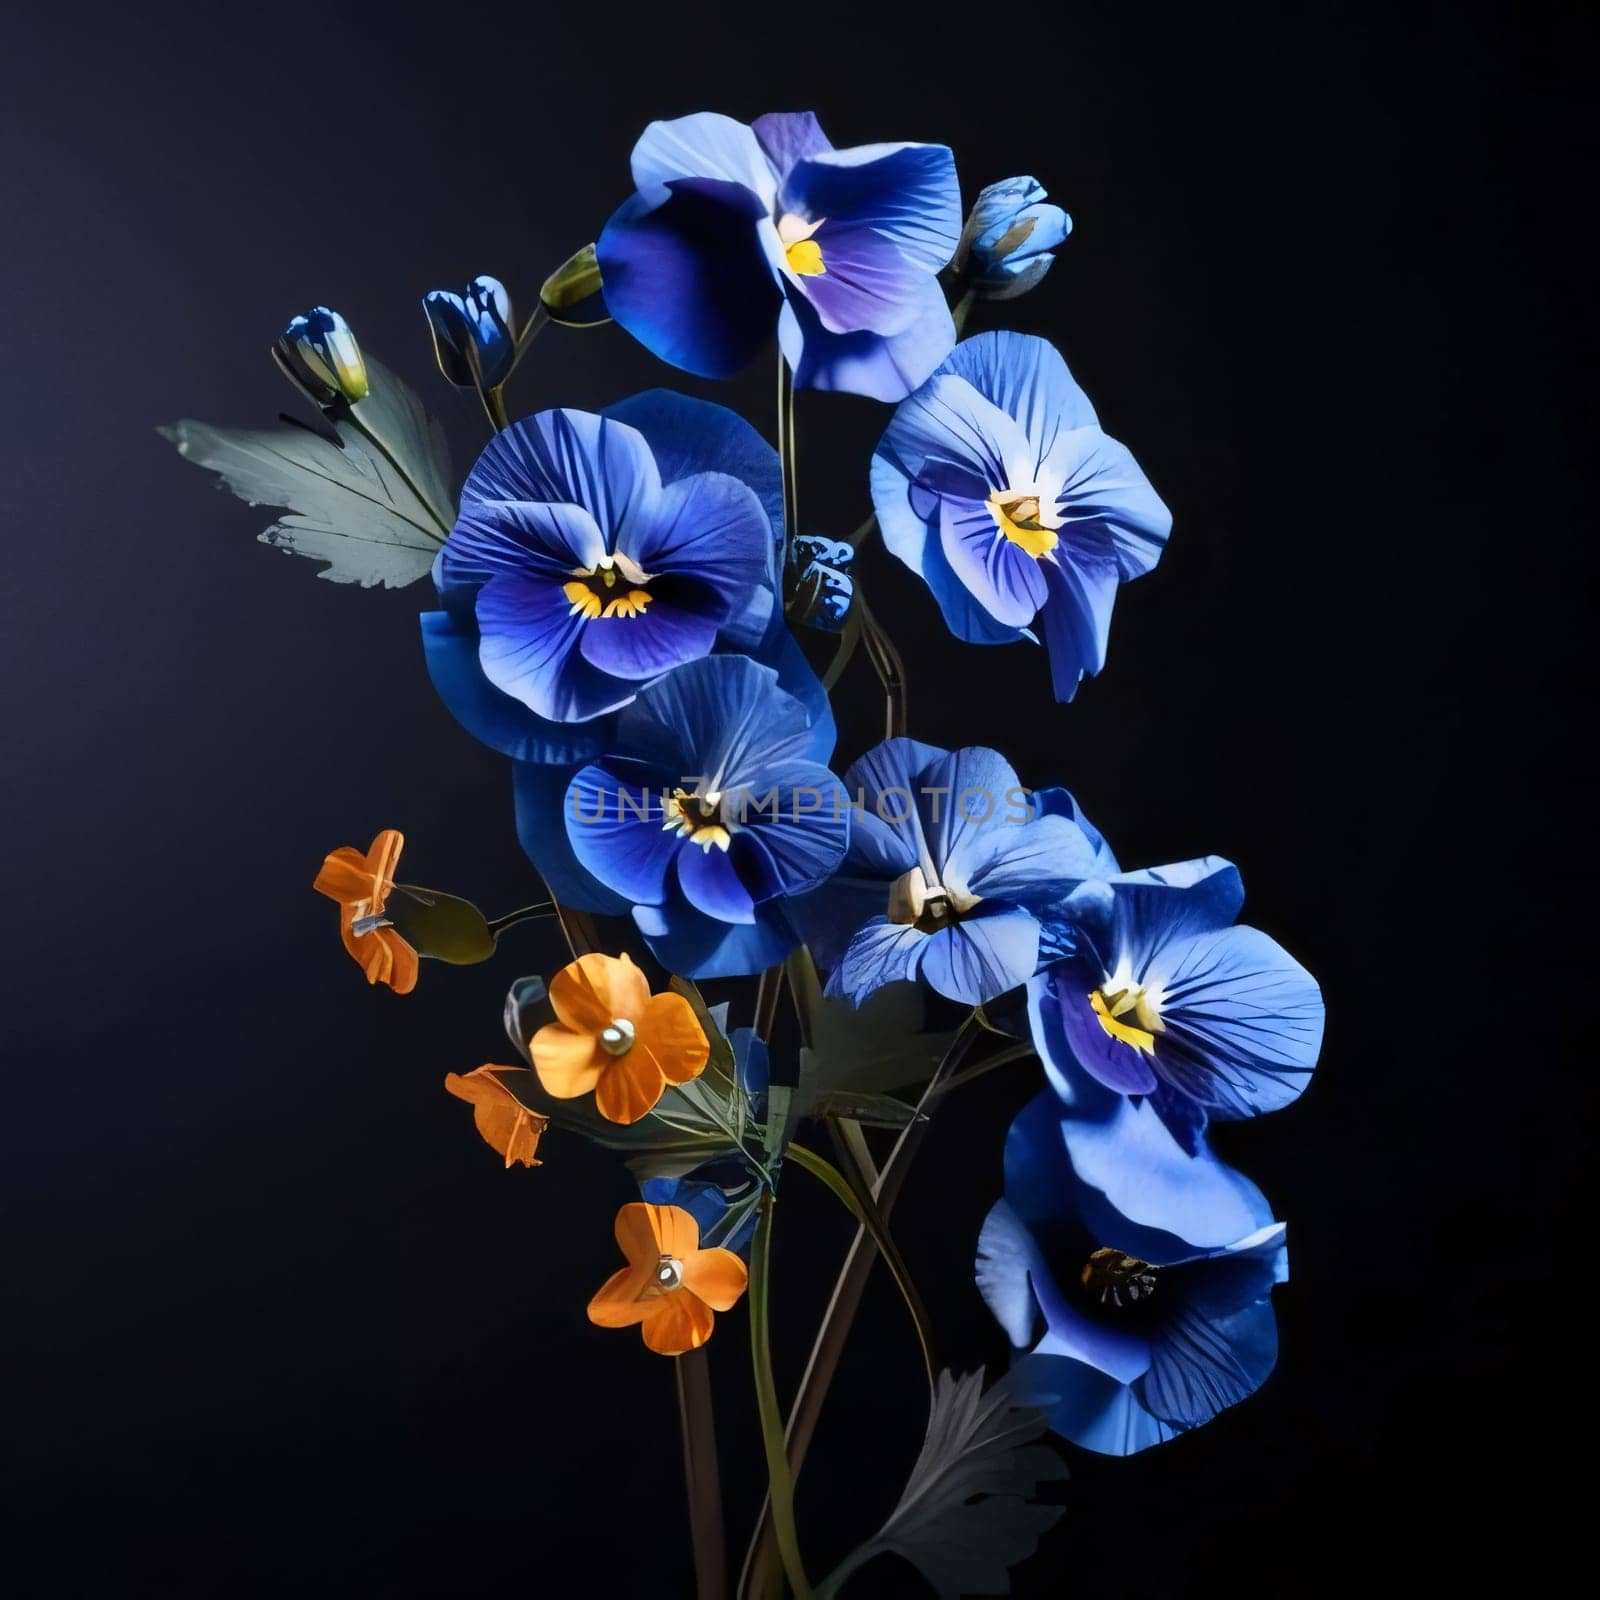 Blue flowers - pansies on a dark black isolated background. Flowering flowers, a symbol of spring, new life. A joyful time of nature waking up to life.